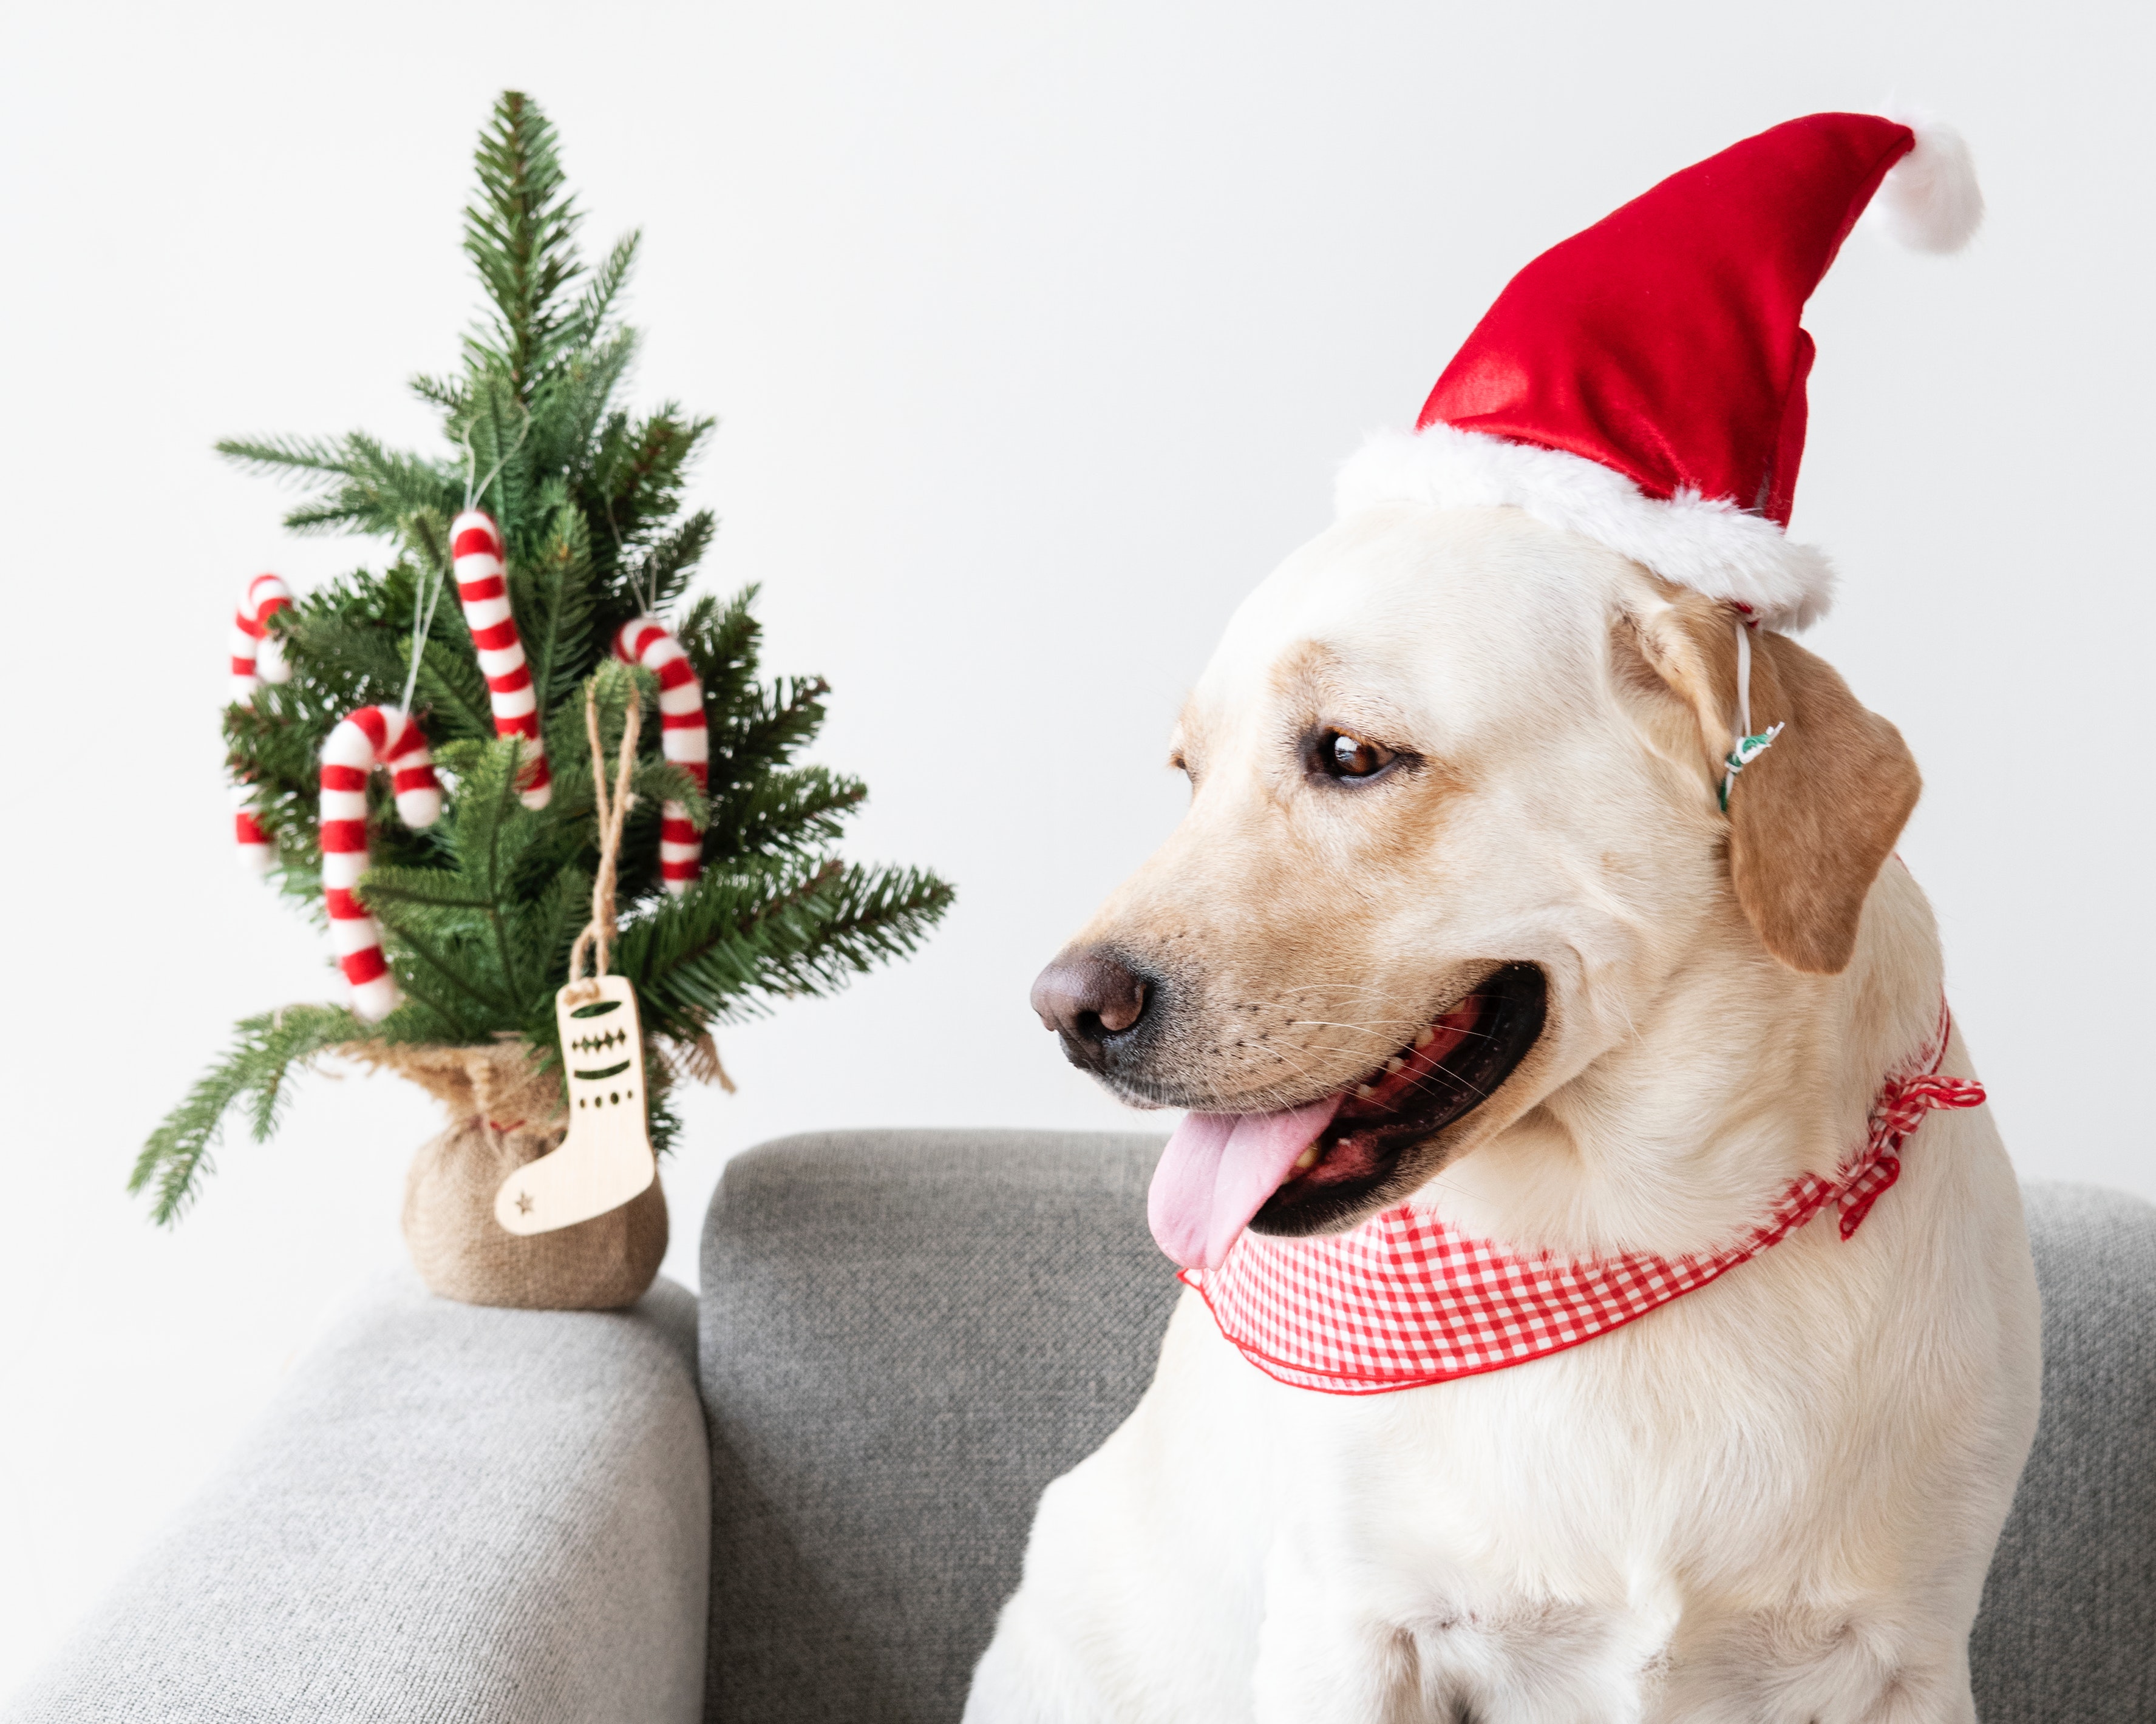 A dog with Christmas decorations sitting on a sofa